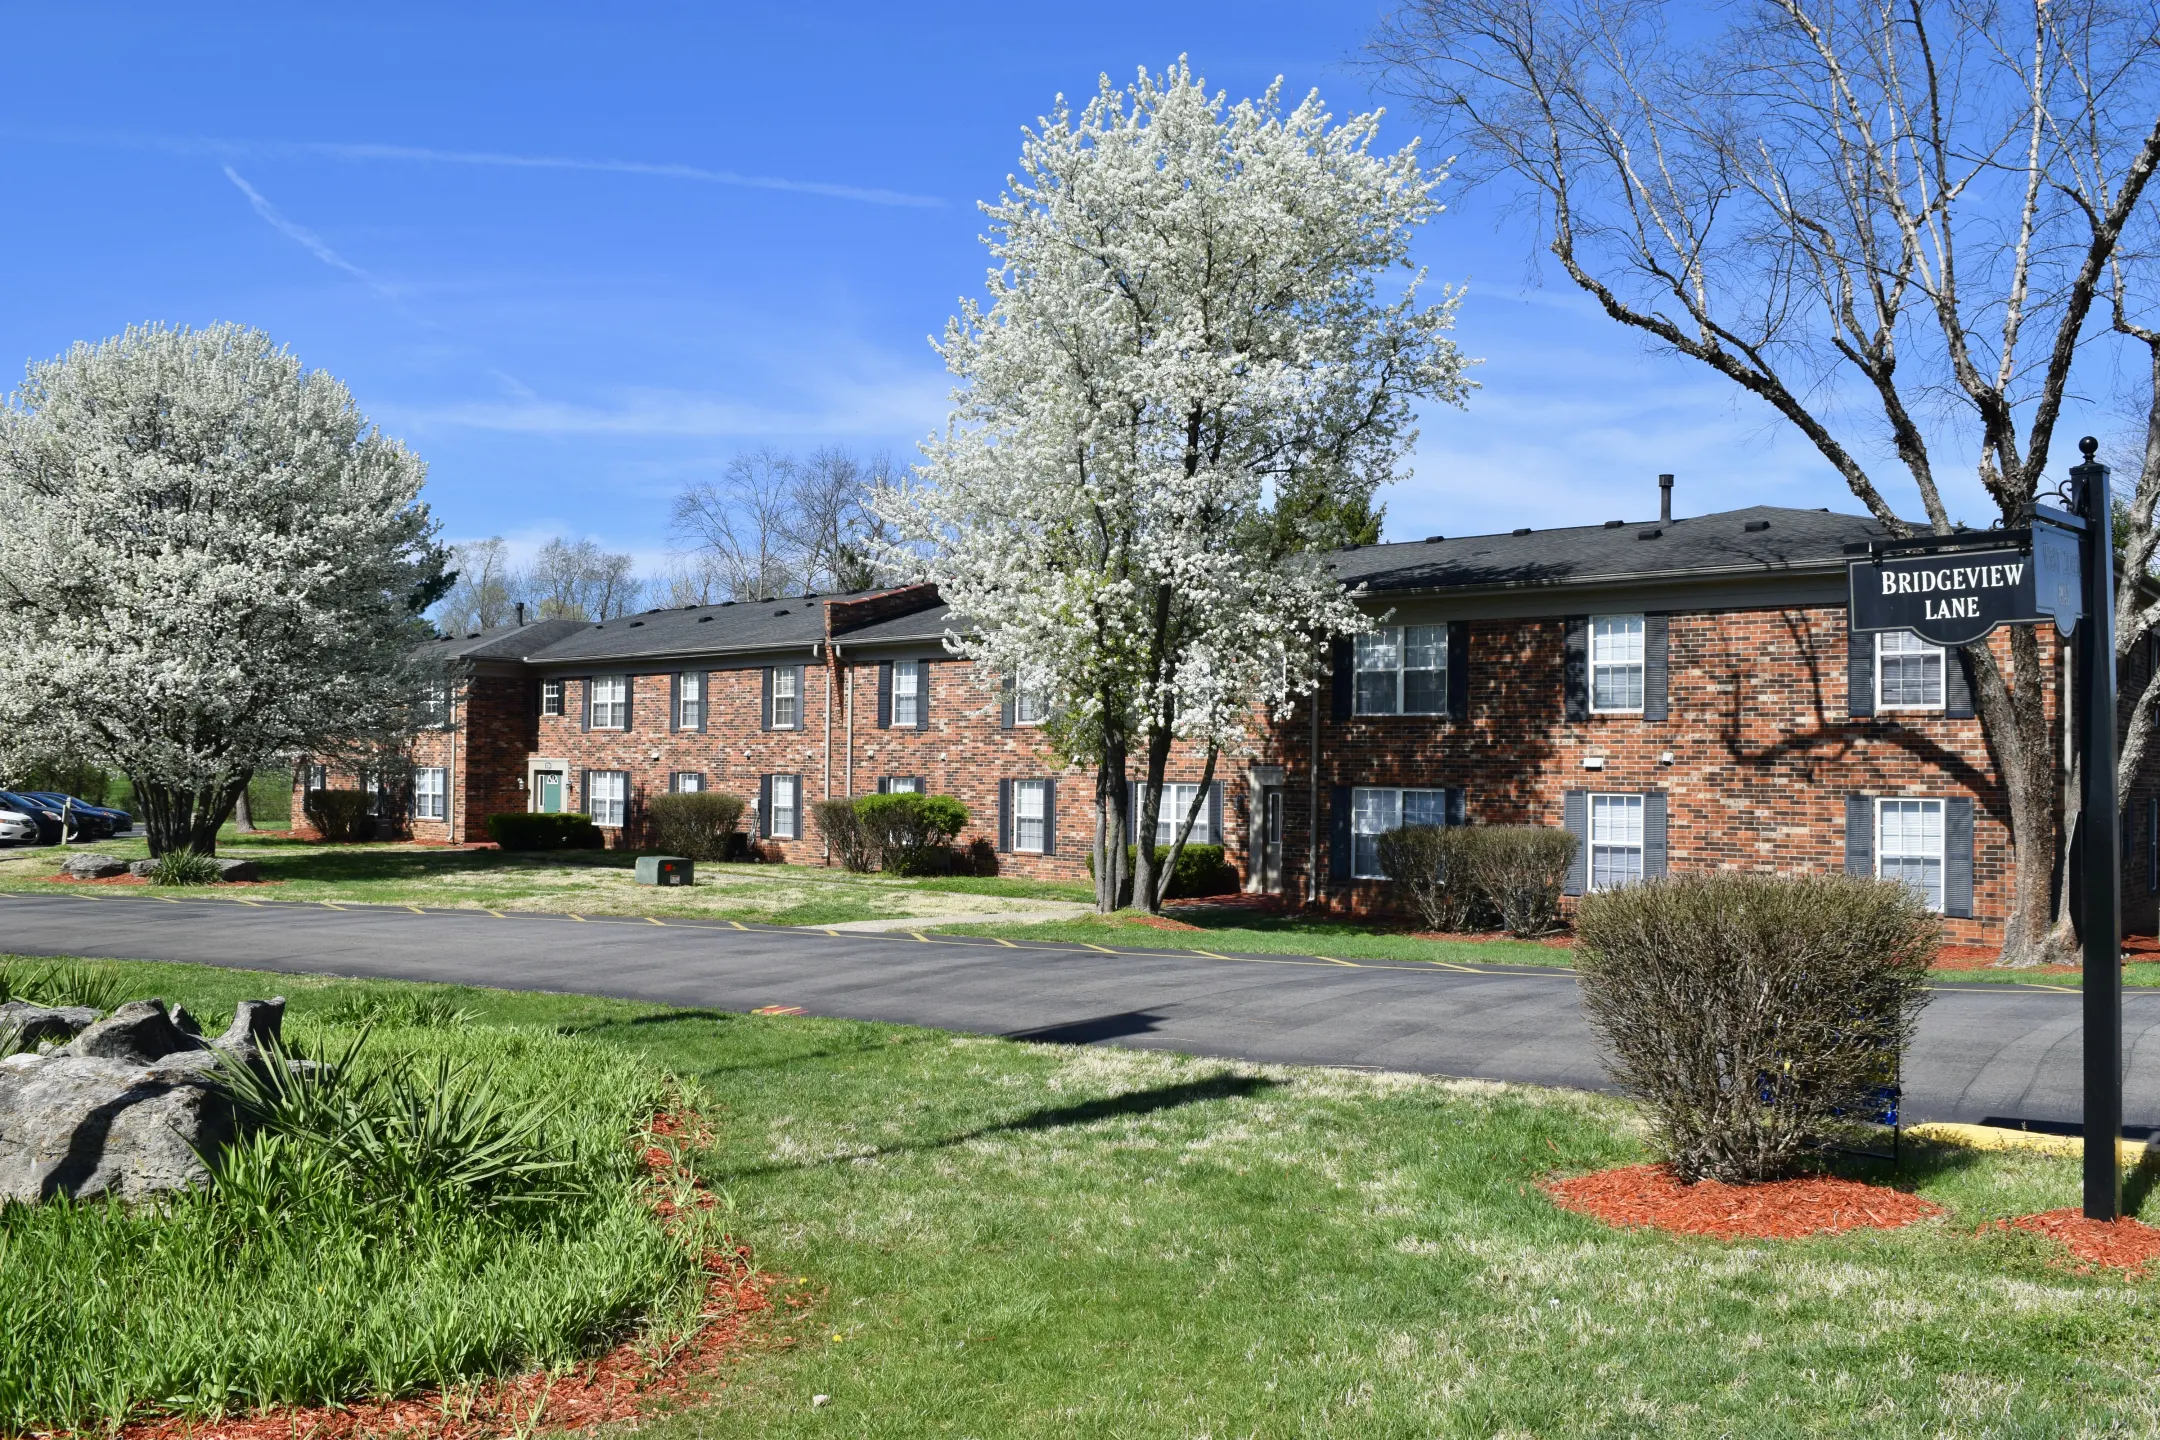 Building - Countrybrook Apartments - Louisville, KY